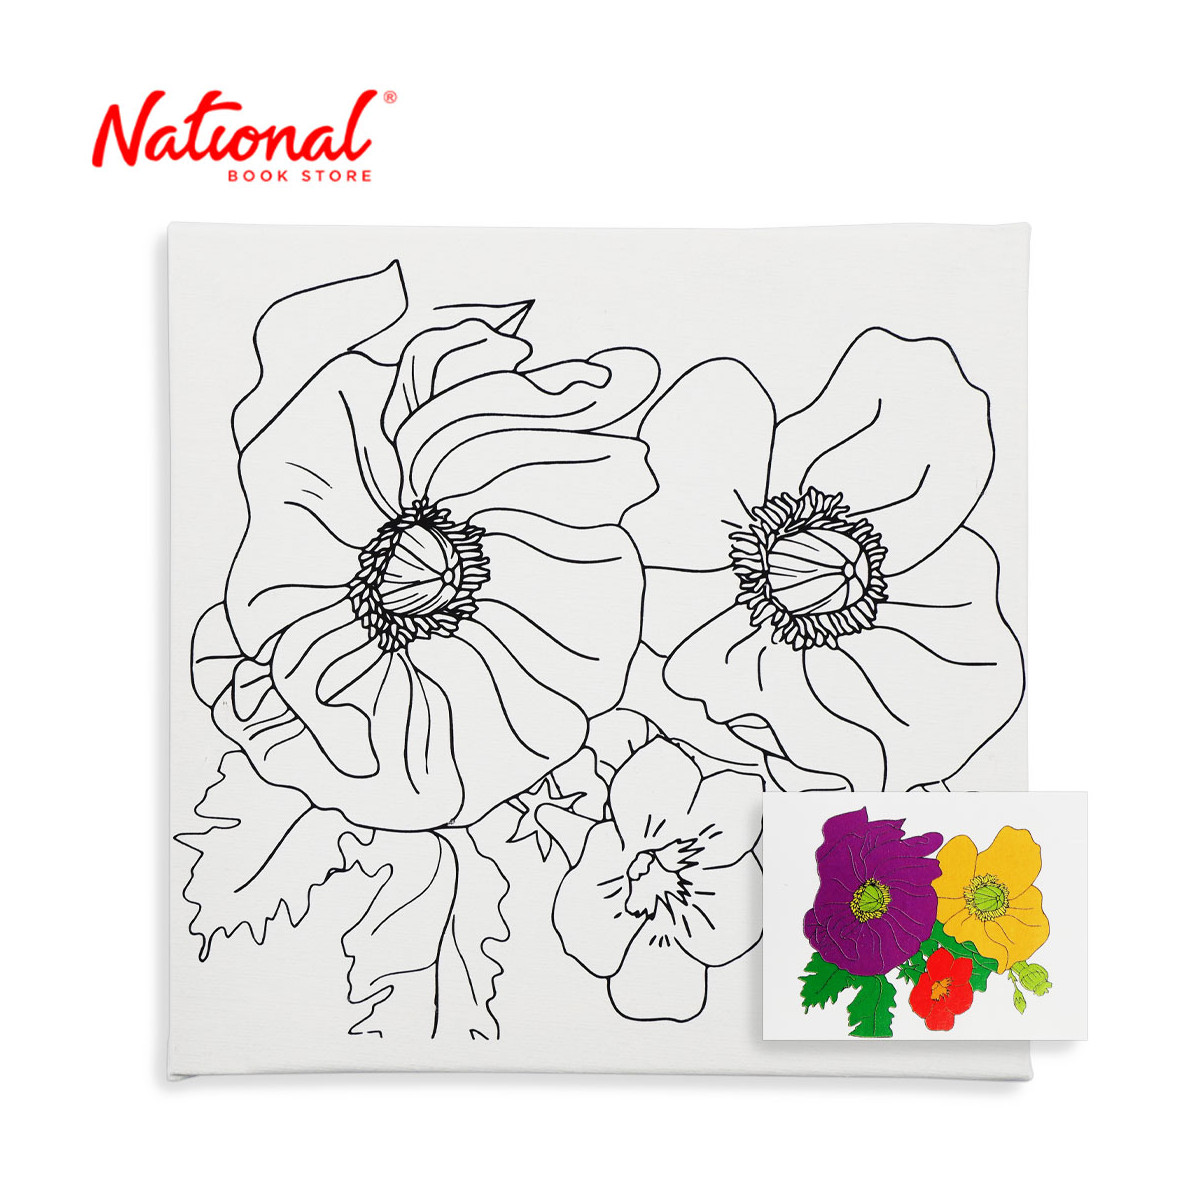 Canvas Painting Set 20x20 cm Flowers EG20203 with Acrylic Colors and Brush - Arts & Crafts Supplies